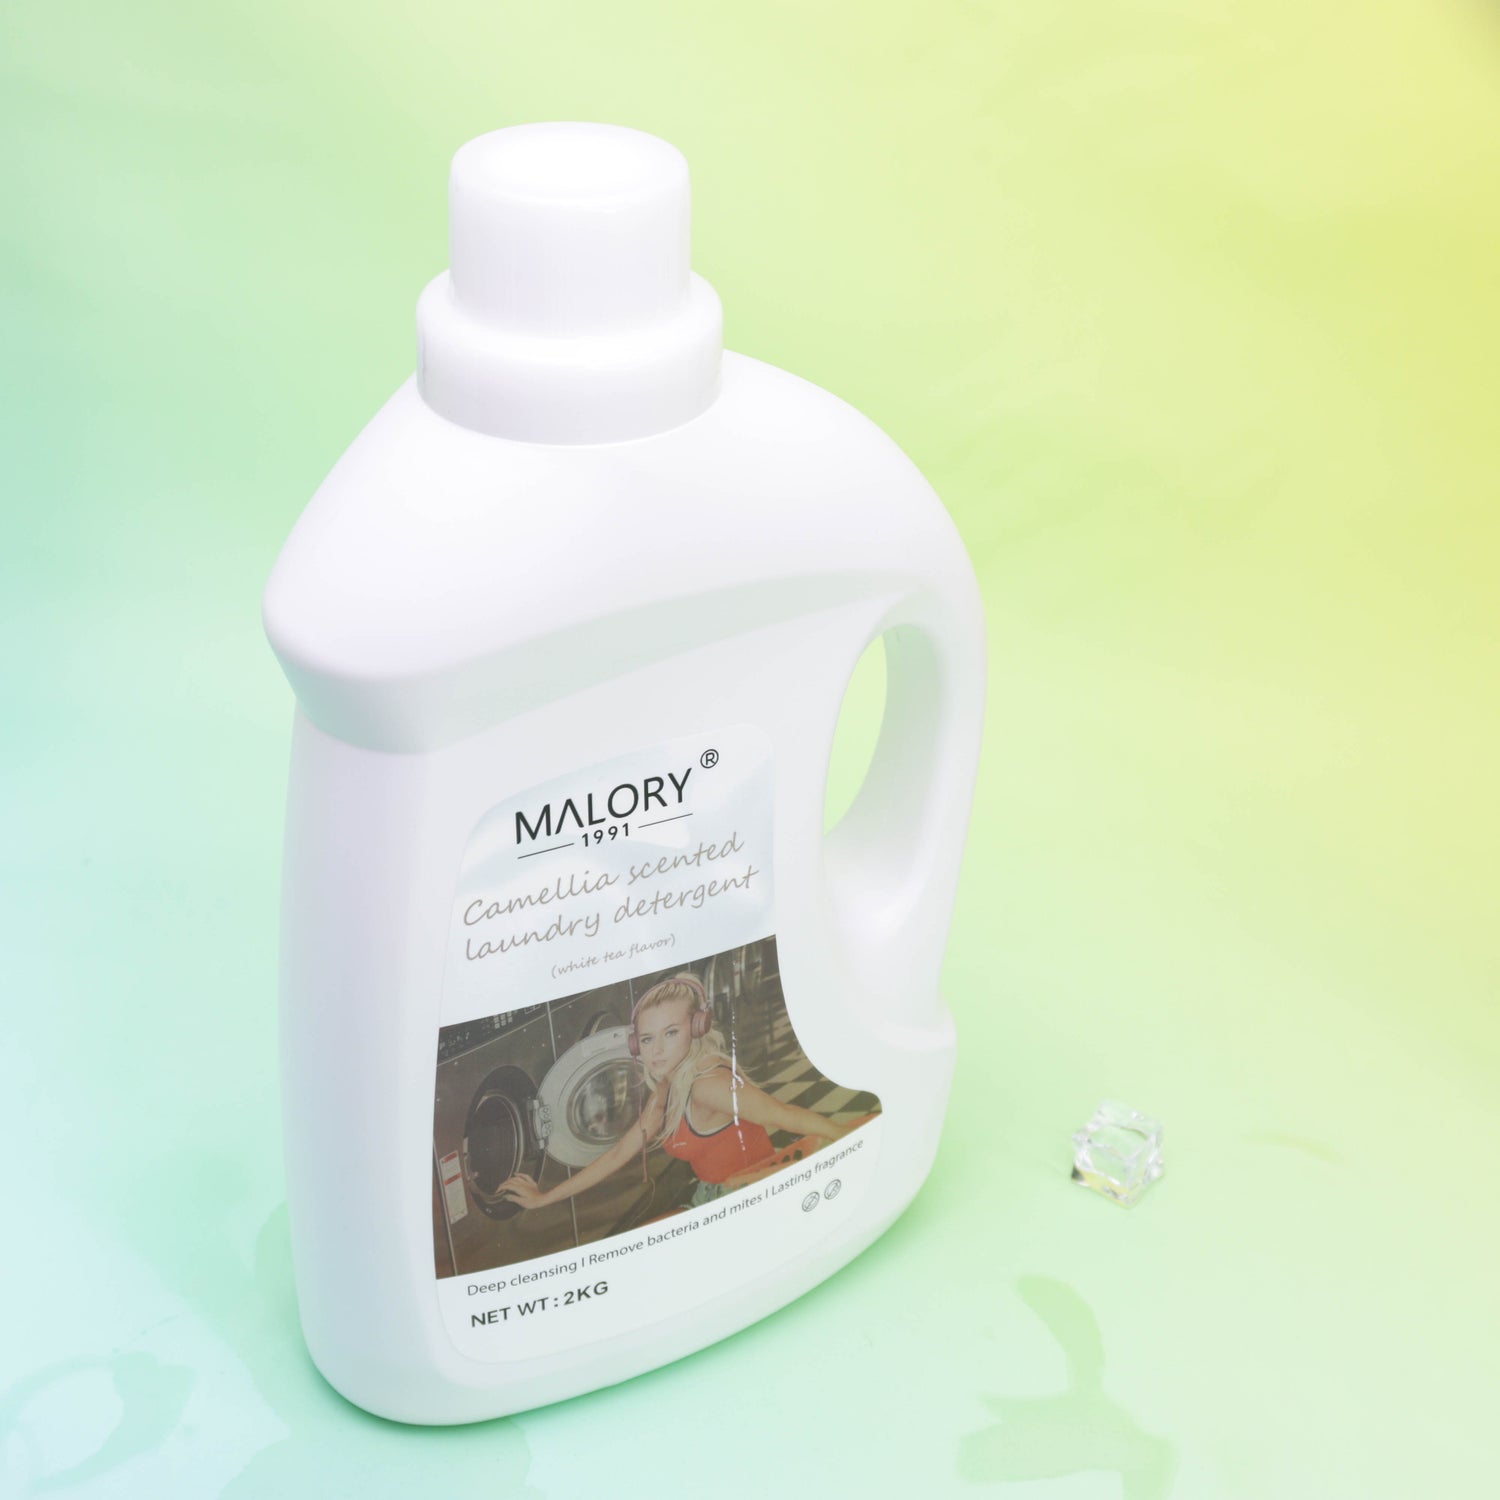 MALORY Camellia Scented Laundry Detergent